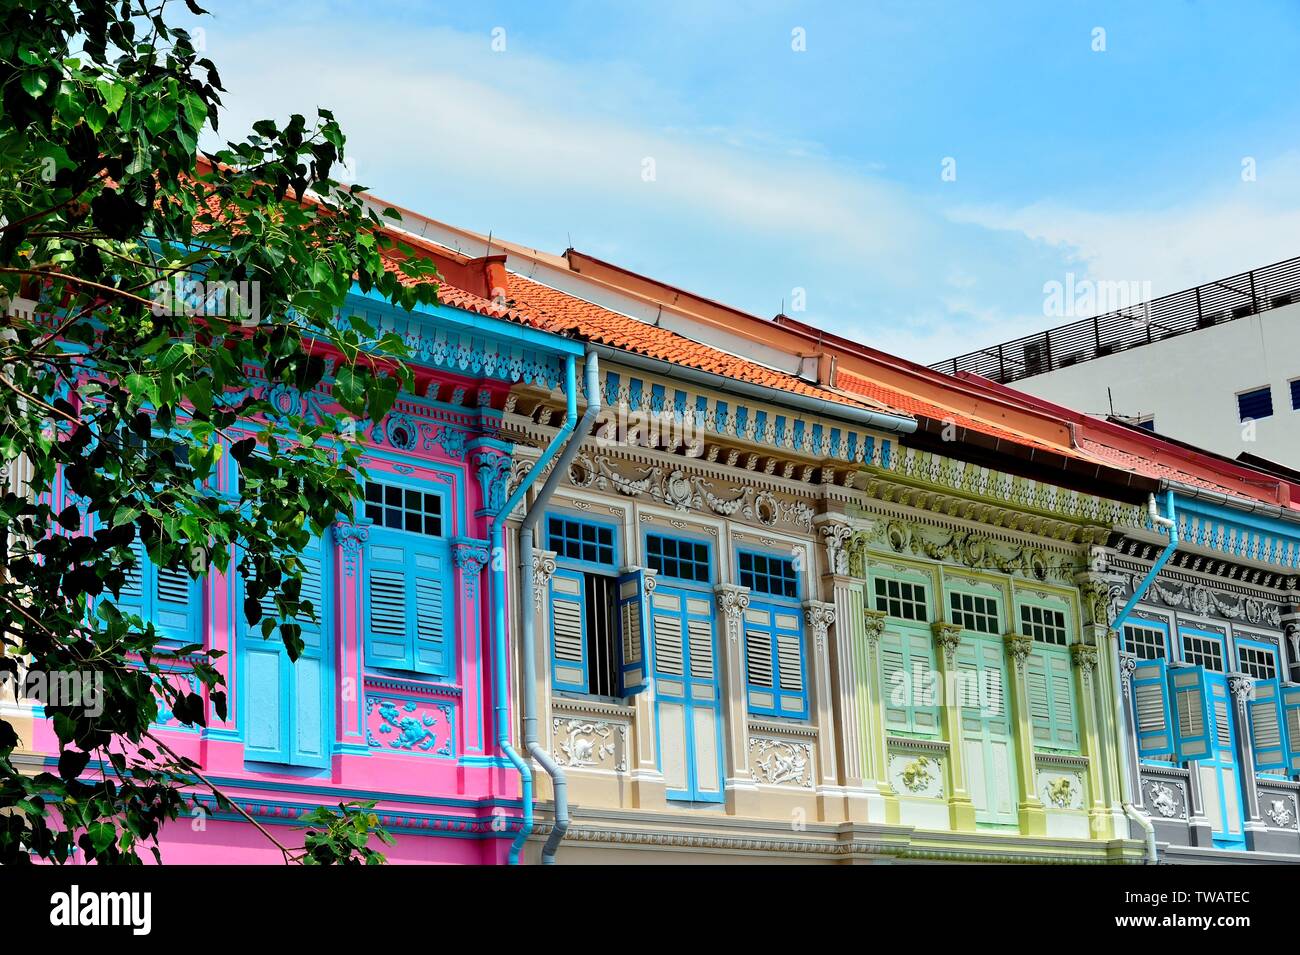 Front view of colourful traditional Singapore Peranakan or Straits Chinese shophouse in historic Joo Chiat East Coast Stock Photo